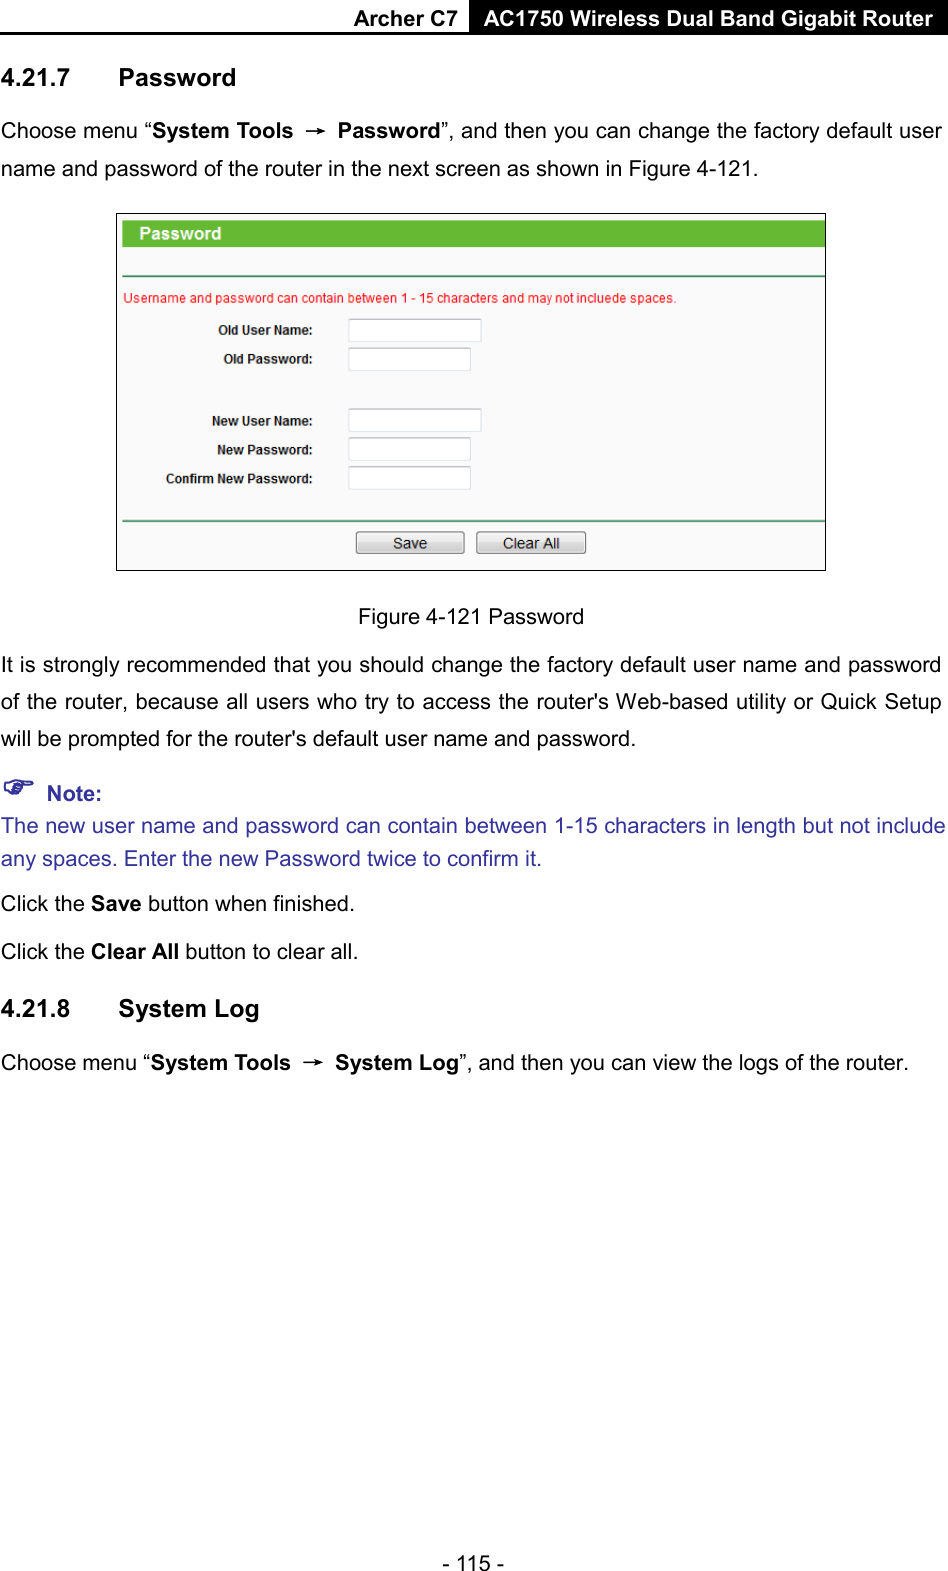 Archer C7 AC1750 Wireless Dual Band Gigabit Router  - 115 - 4.21.7 Password Choose menu “System Tools → Password”, and then you can change the factory default user name and password of the router in the next screen as shown in Figure 4-121.  Figure 4-121 Password It is strongly recommended that you should change the factory default user name and password of the router, because all users who try to access the router&apos;s Web-based utility or Quick Setup will be prompted for the router&apos;s default user name and password.  Note: The new user name and password can contain between 1-15 characters in length but not include any spaces. Enter the new Password twice to confirm it. Click the Save button when finished. Click the Clear All button to clear all. 4.21.8 System Log Choose menu “System Tools → System Log”, and then you can view the logs of the router. 